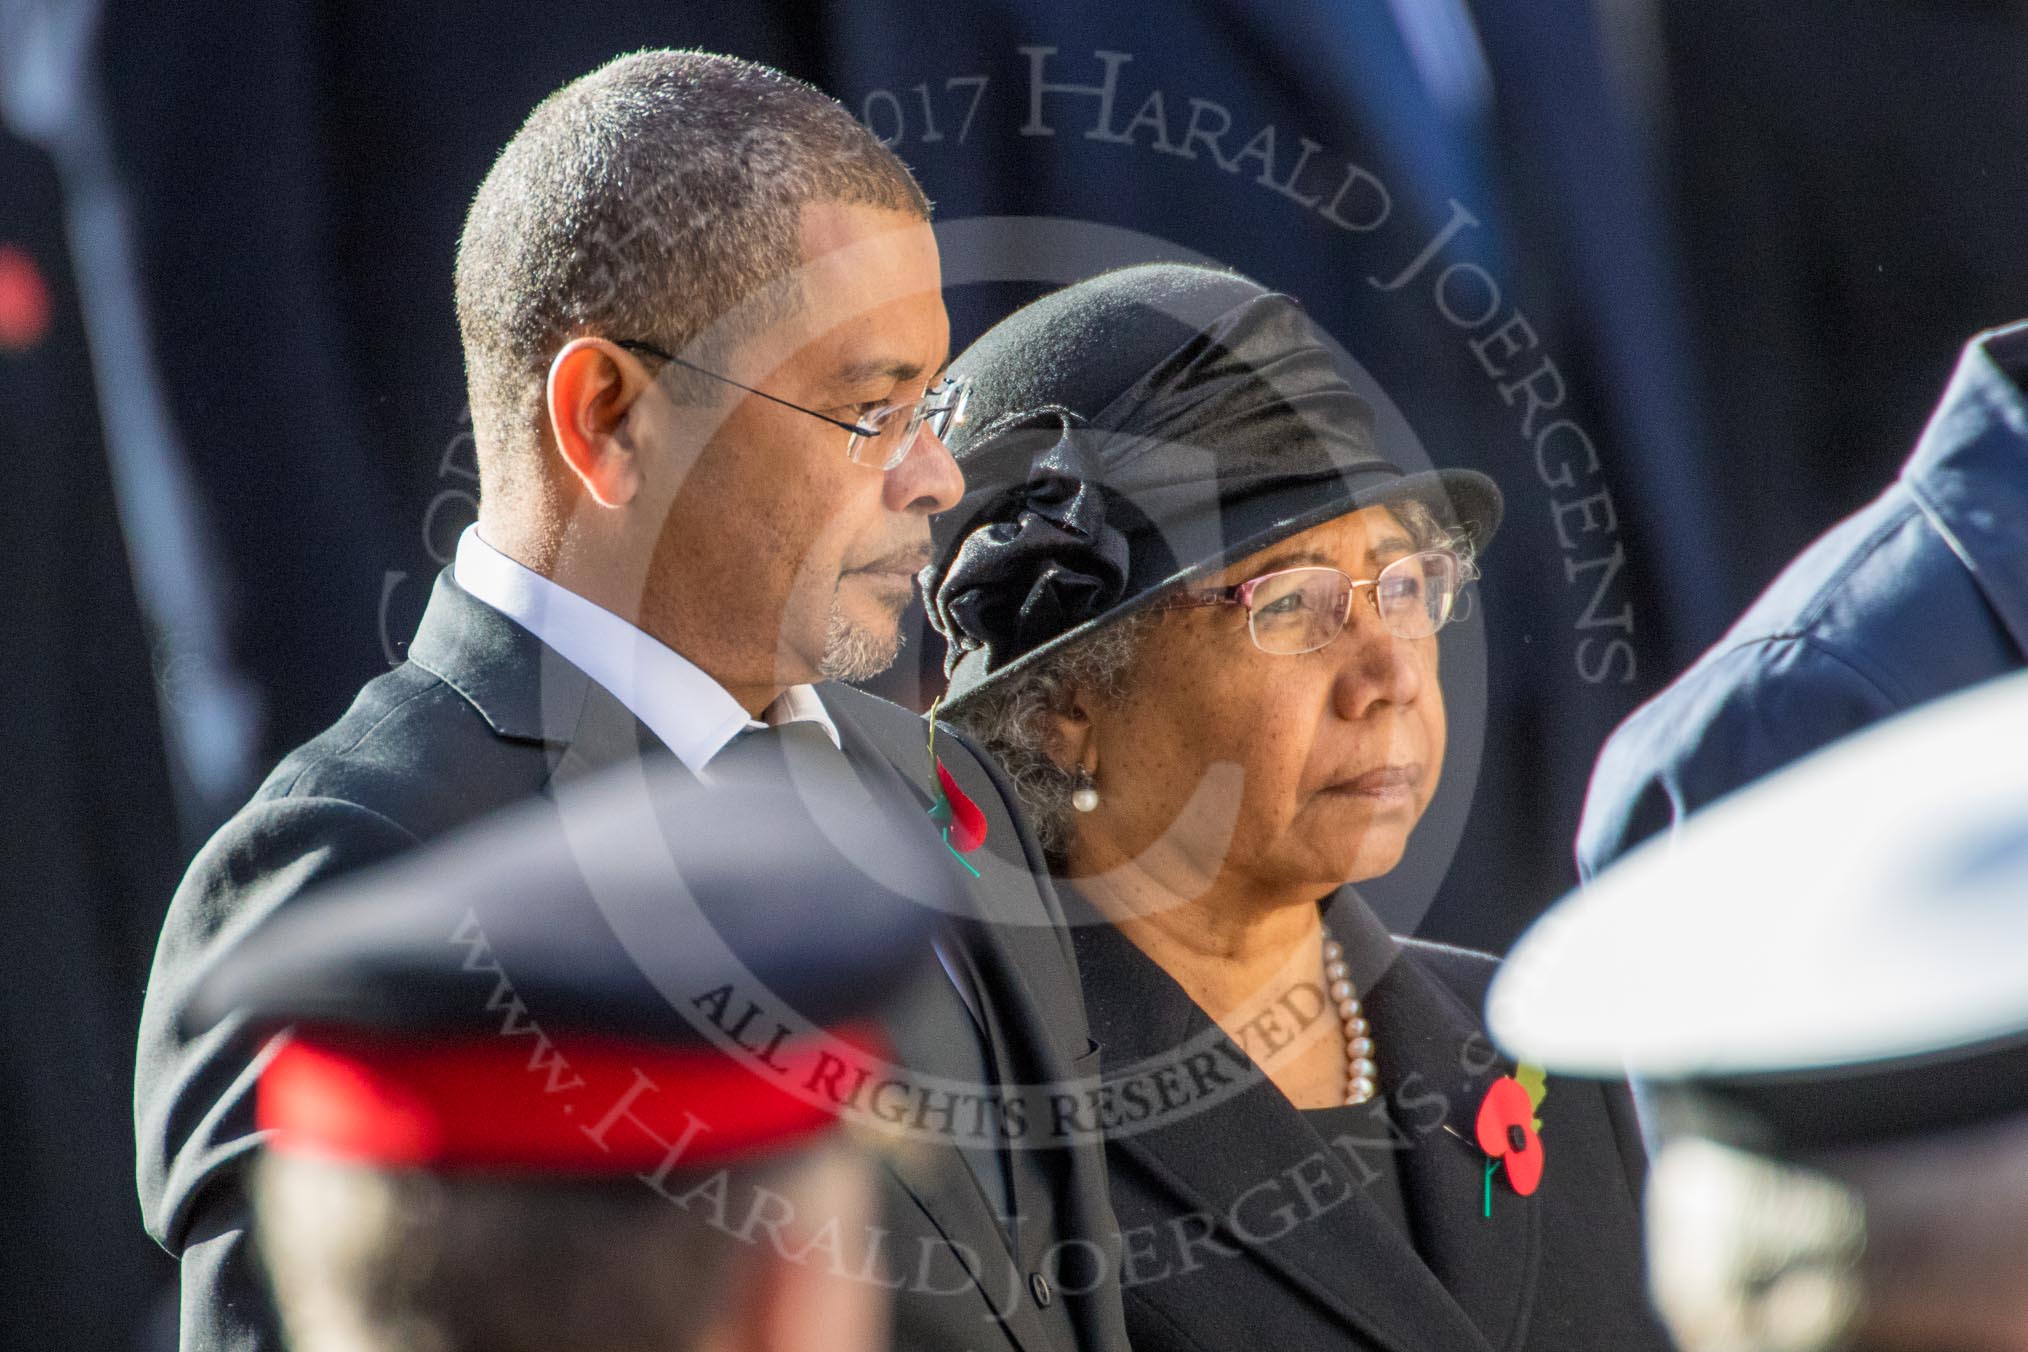 The High Commissioner of the Seychelles, Derick Ally, and the High Commissioner of Papua New Guinea, Winnie Kiap CBE, during Remembrance Sunday Cenotaph Ceremony 2018 at Horse Guards Parade, Westminster, London, 11 November 2018, 11:14.